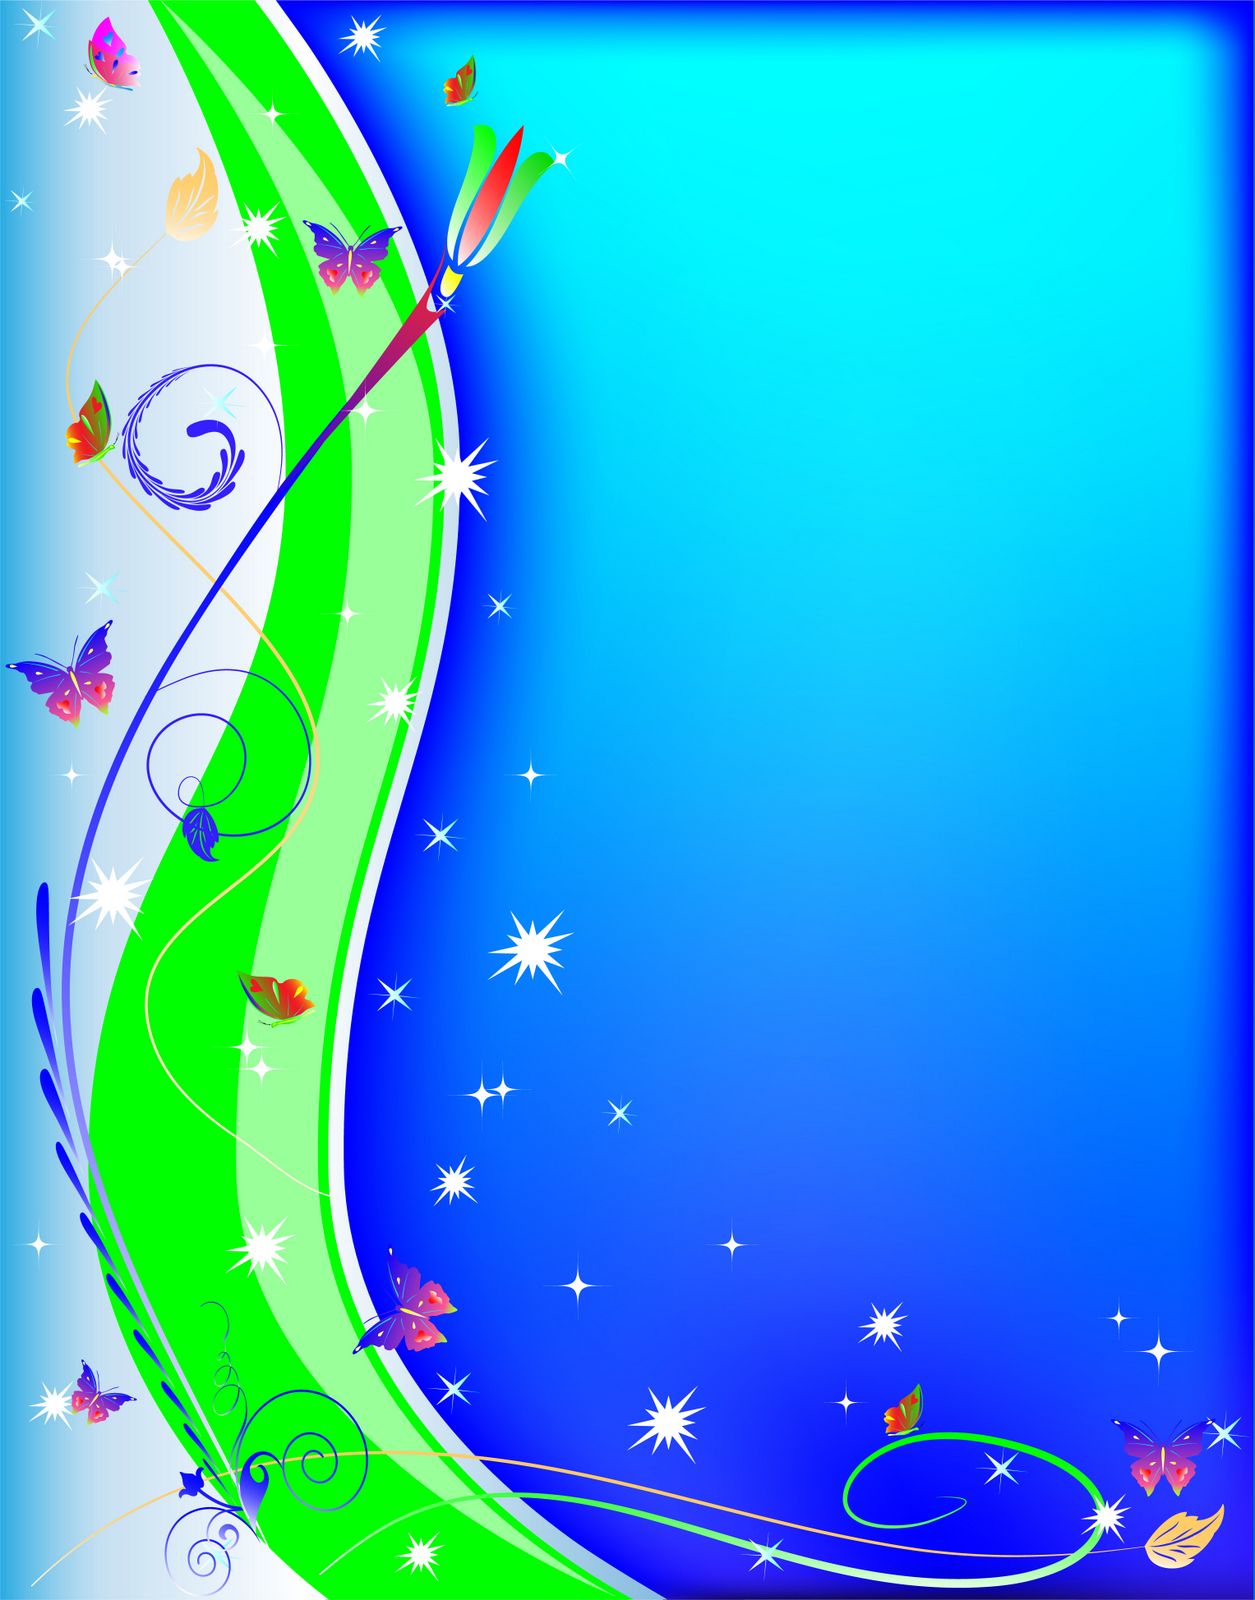 Wavy lines and butterflies free powerpoint background